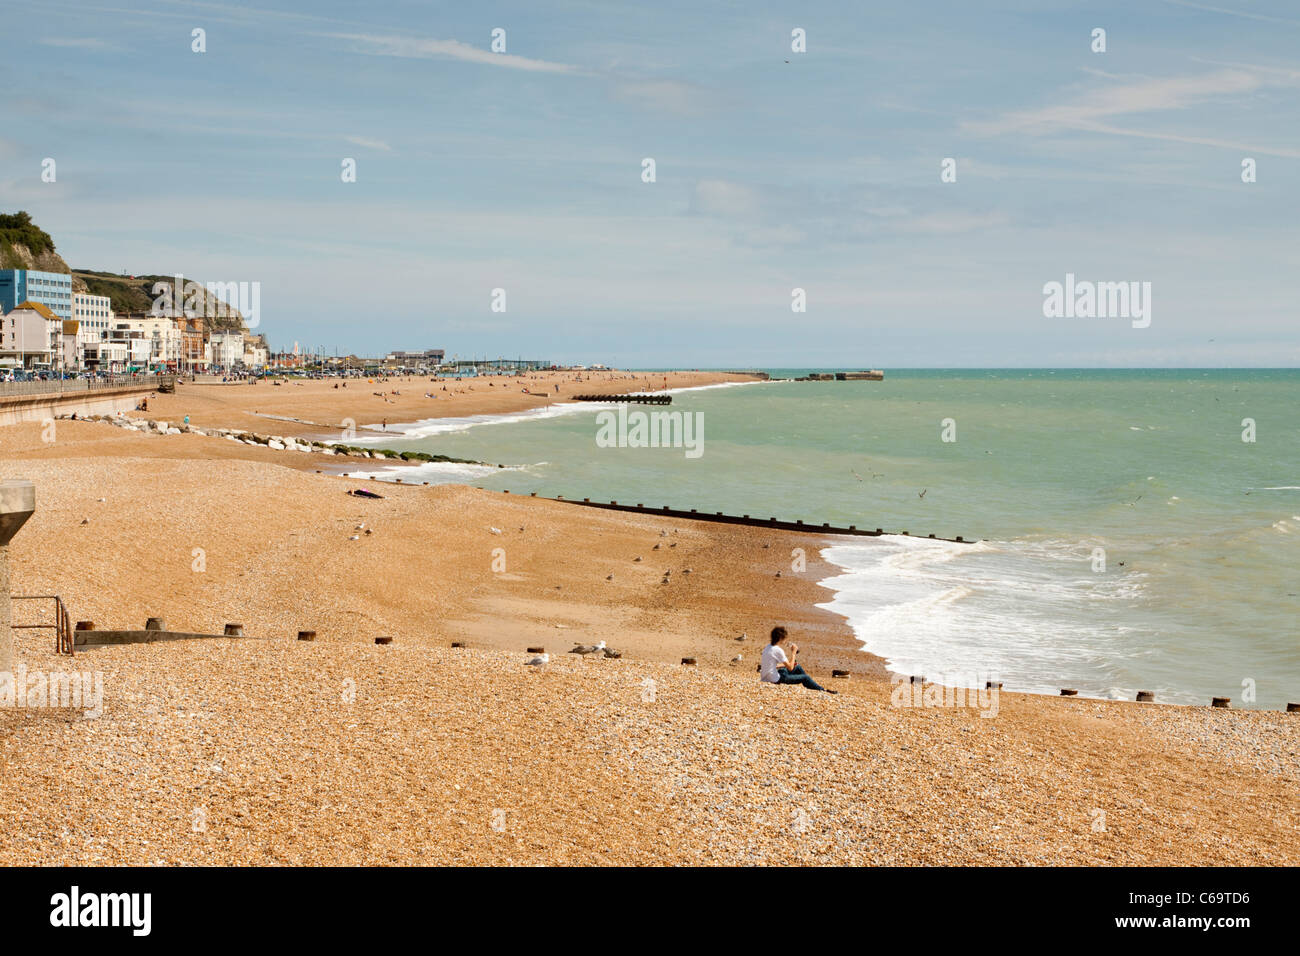 Hastings beach/seafront, East Sussex, England, UK Stock Photo